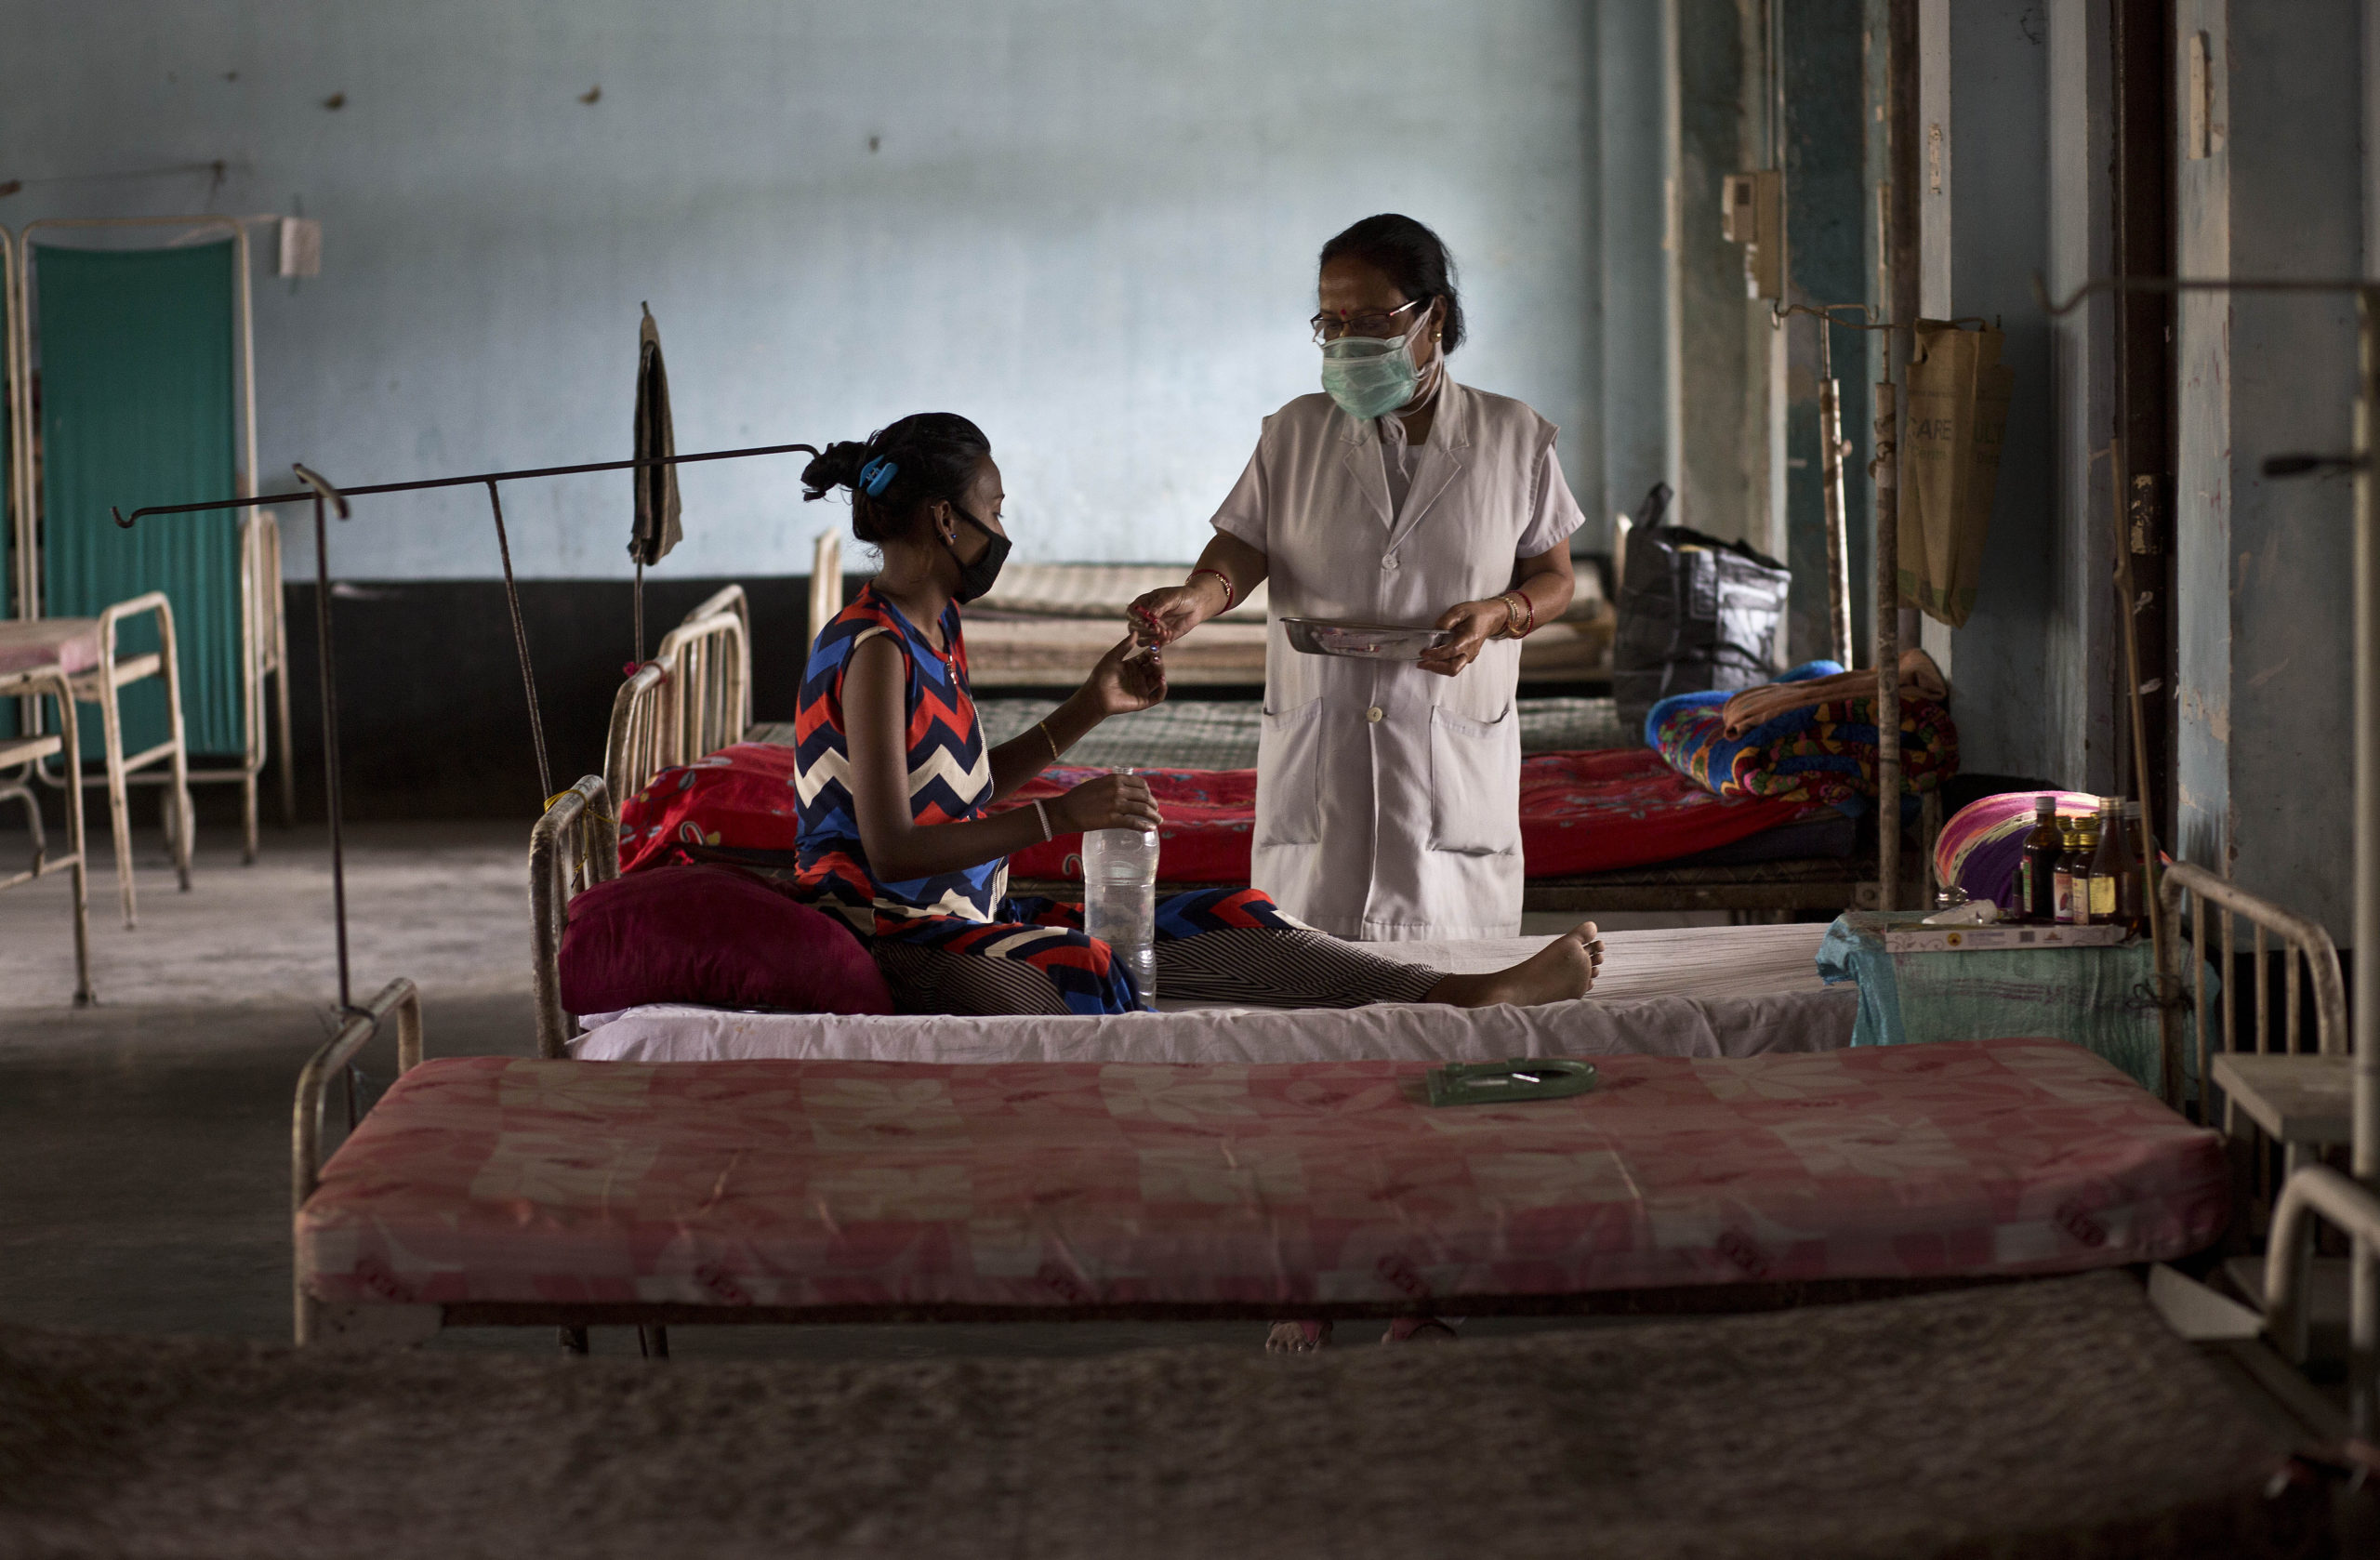 An Indian tuberculosis patient receives medicines from a nurse at a TB hospital in Gauhati, India